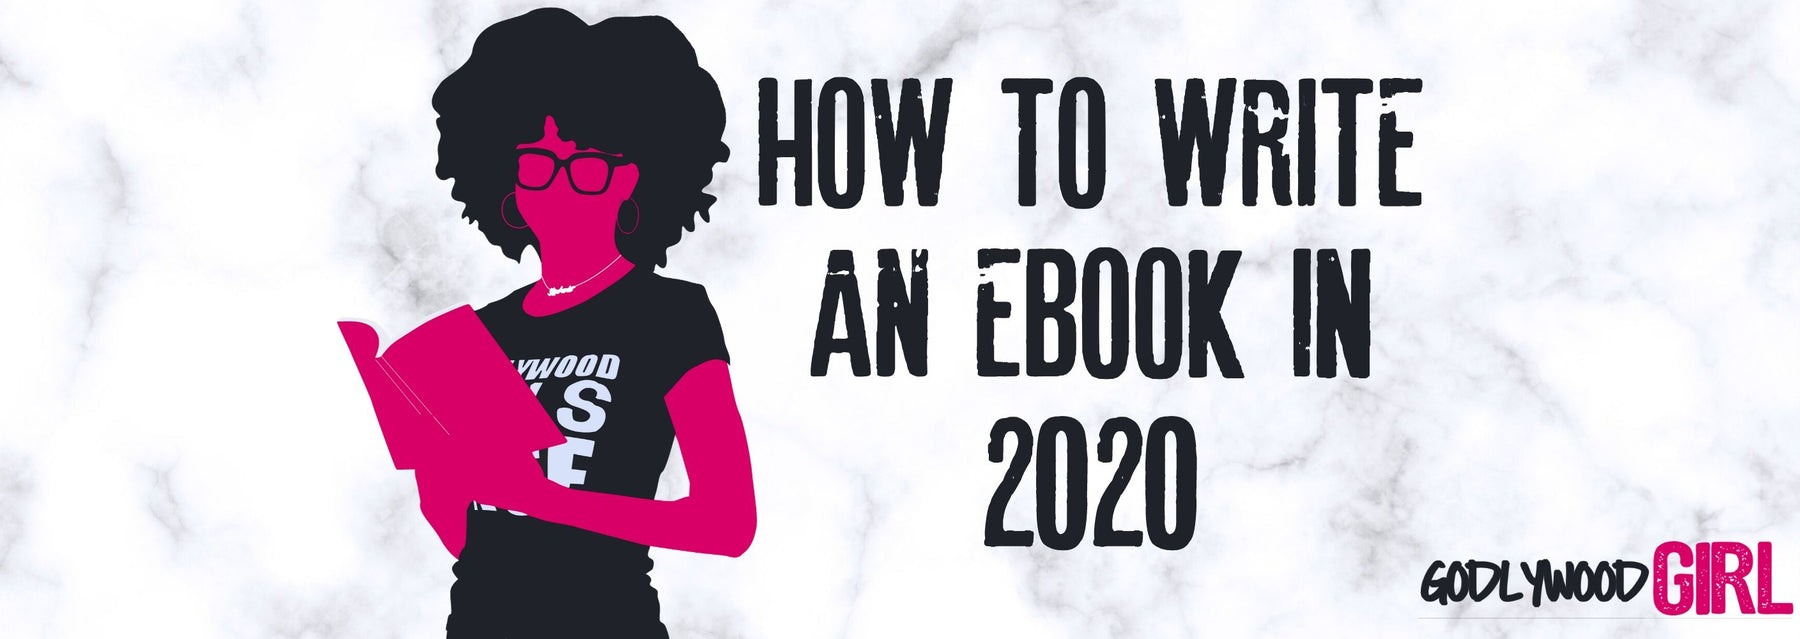 HOW TO WRITE AN EBOOK AND MAKE MONEY ONLINE IN 2020 | AUTHORTUBE | Christian Entrepreneur Series